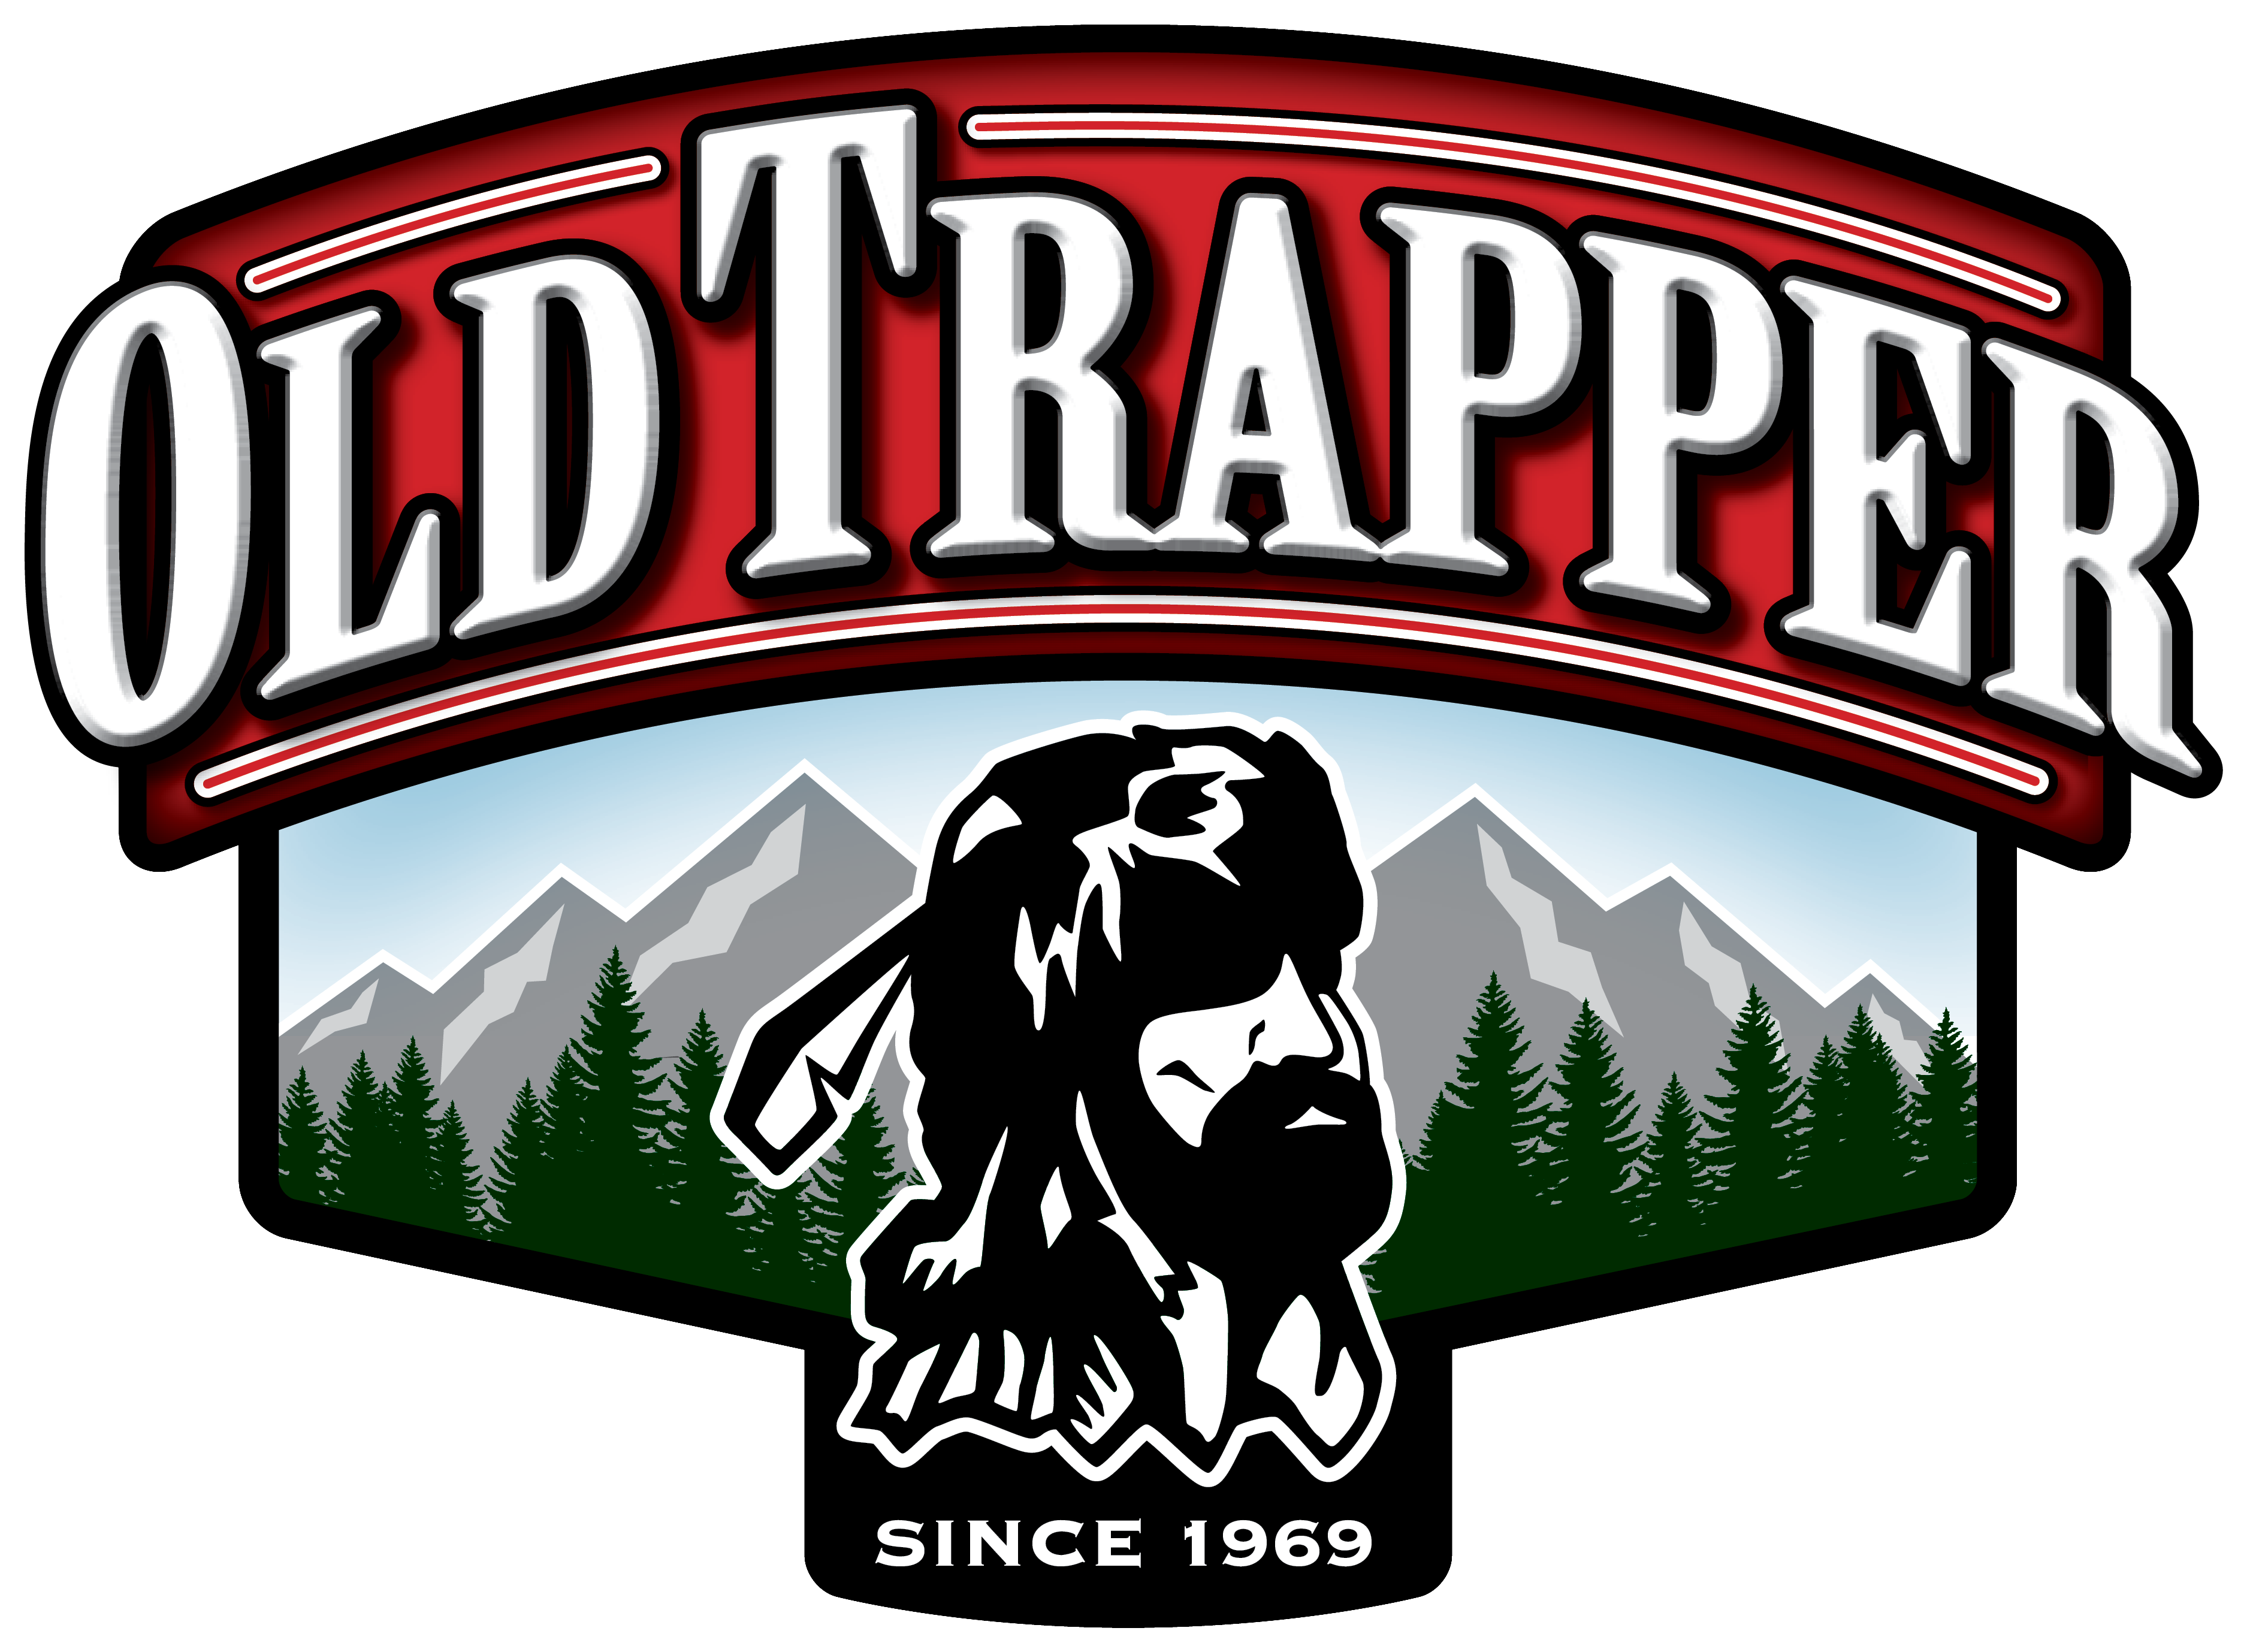 Old Trapper Logo - Old Trapper Smoked Products (3900x3000)